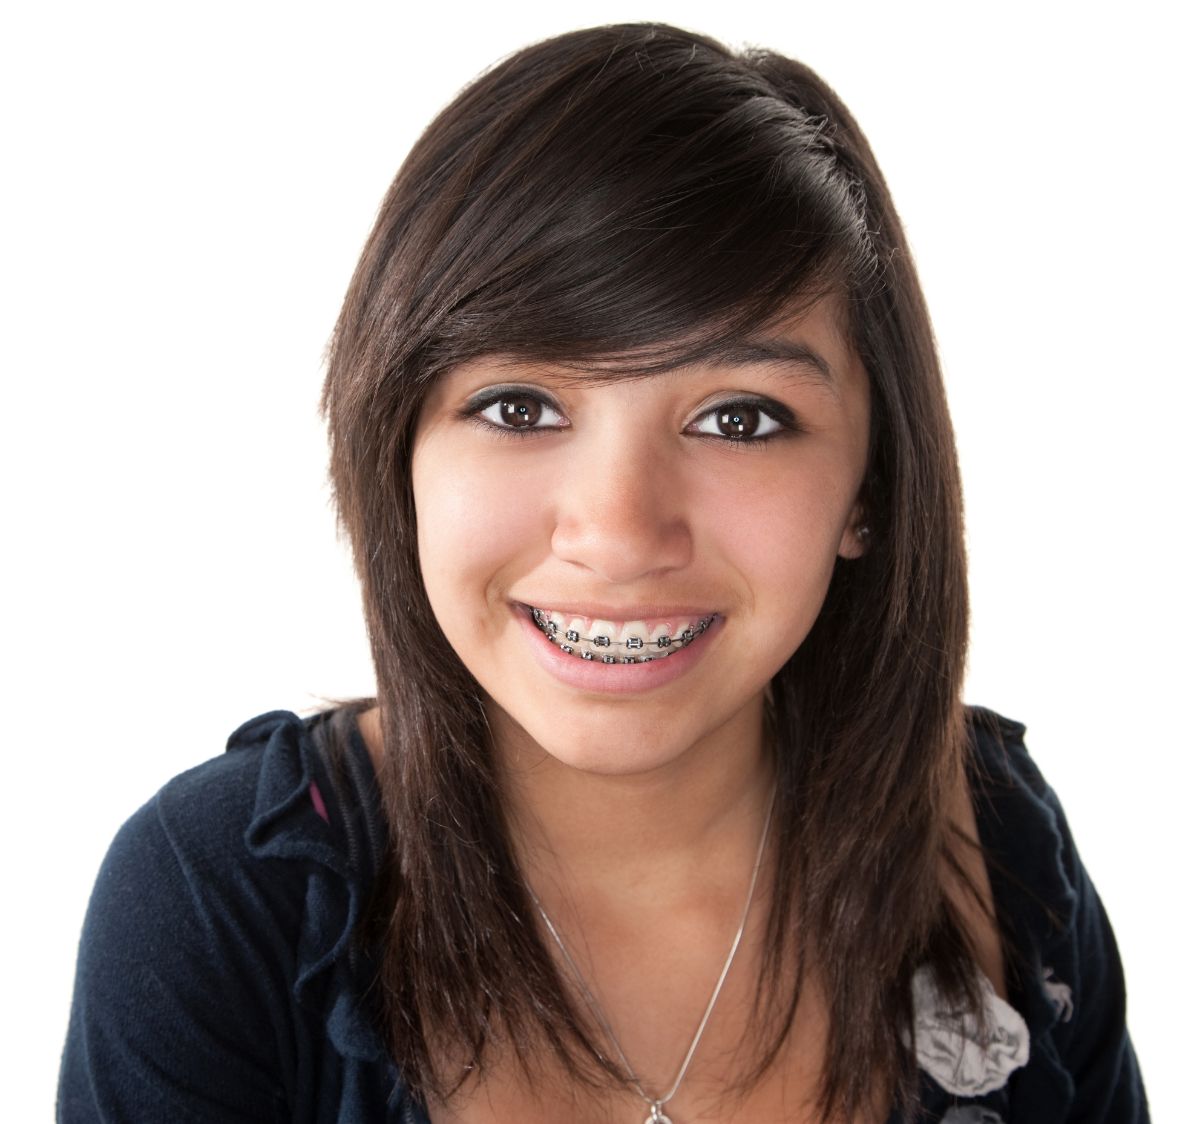 Braces or Invisalign: Which Option Is Right For Me?